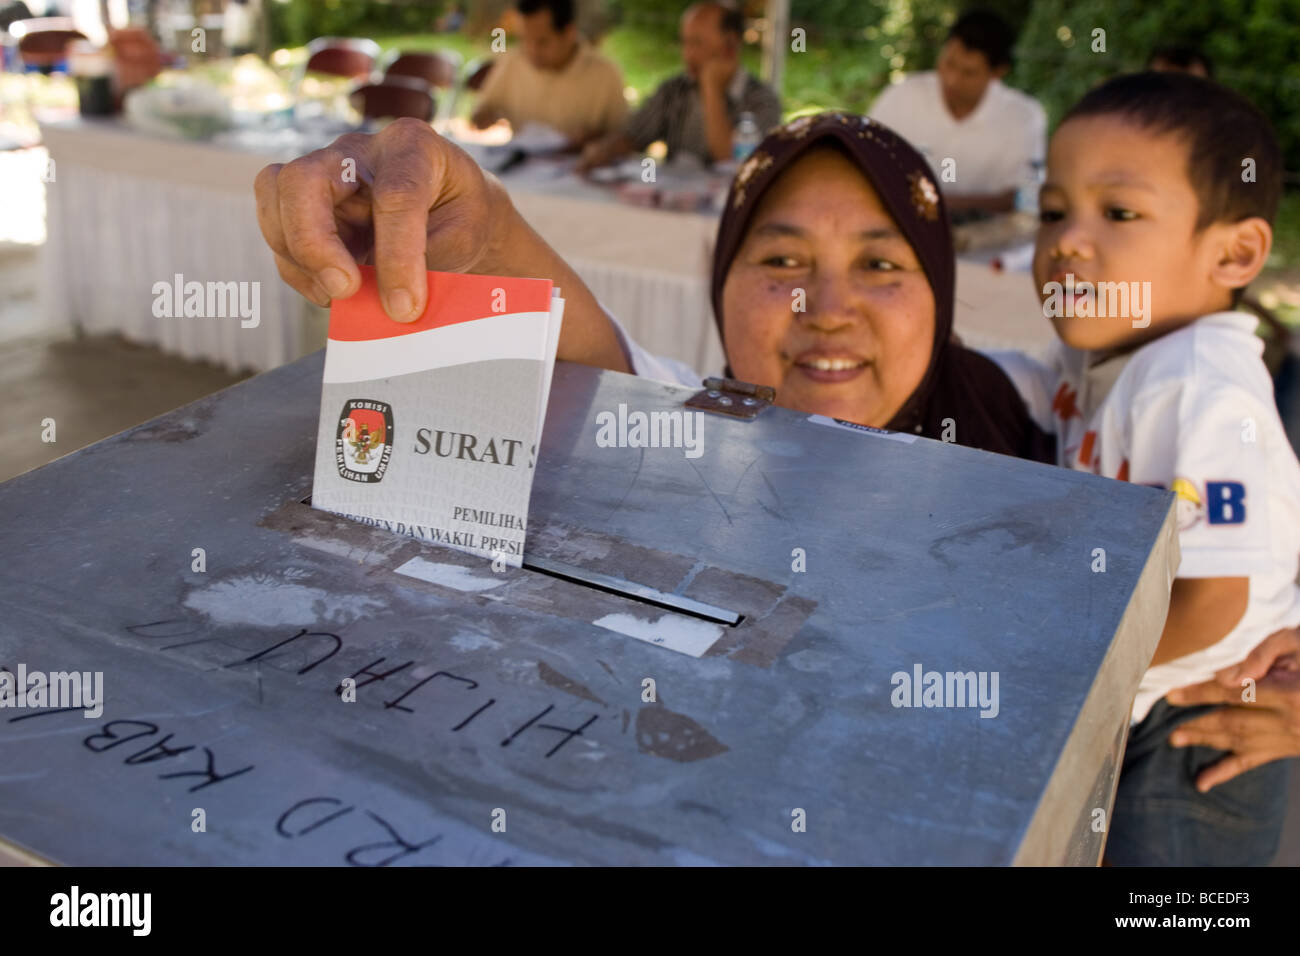 2009 indonesian presidential election Stock Photo